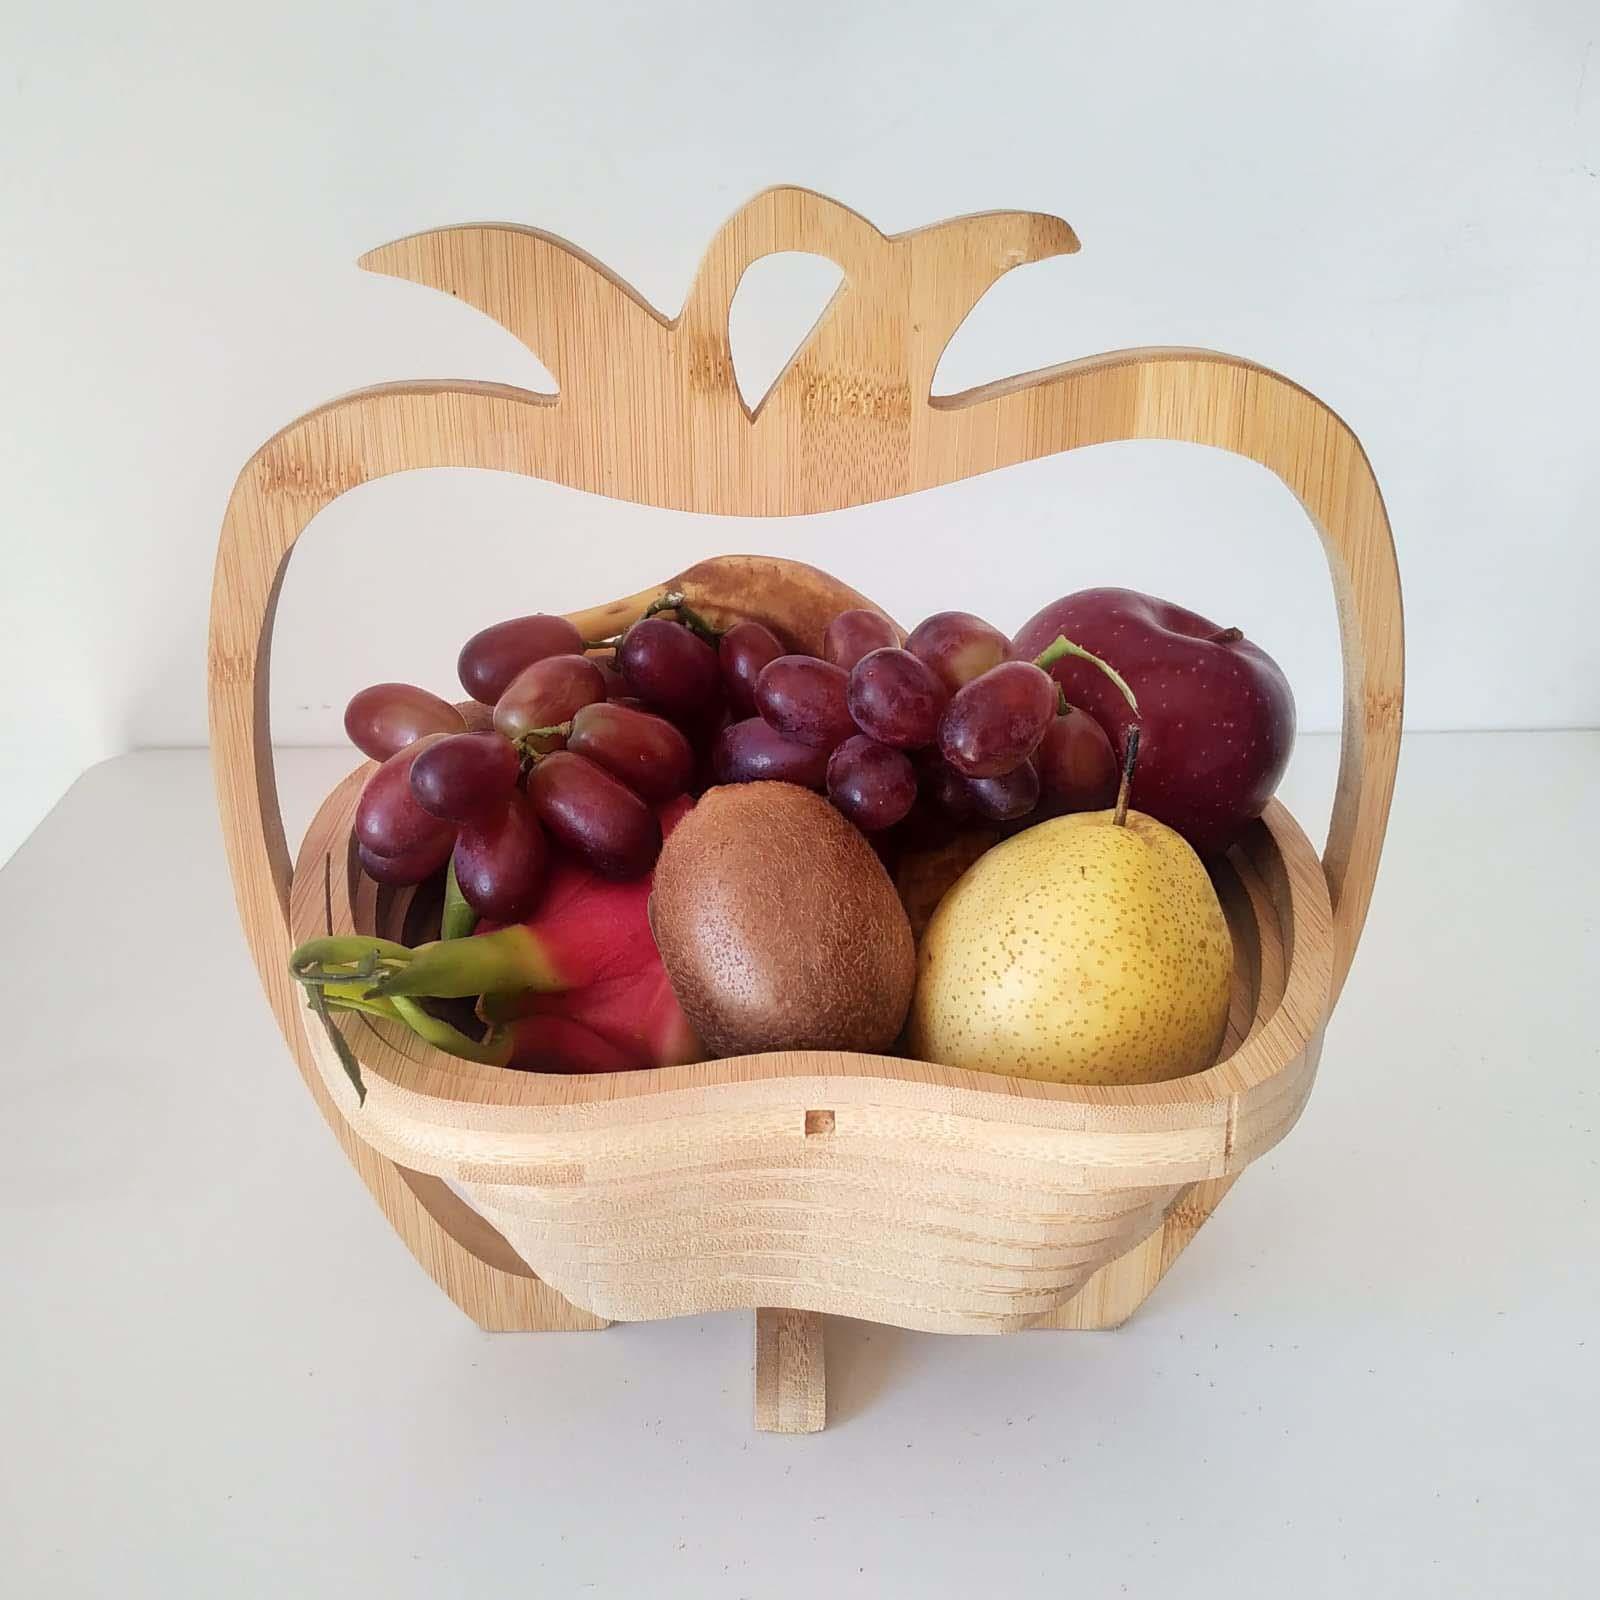 Fruit Basket Collapsible Snack Storage Tray Decorative for Home Kitchen Pineapple